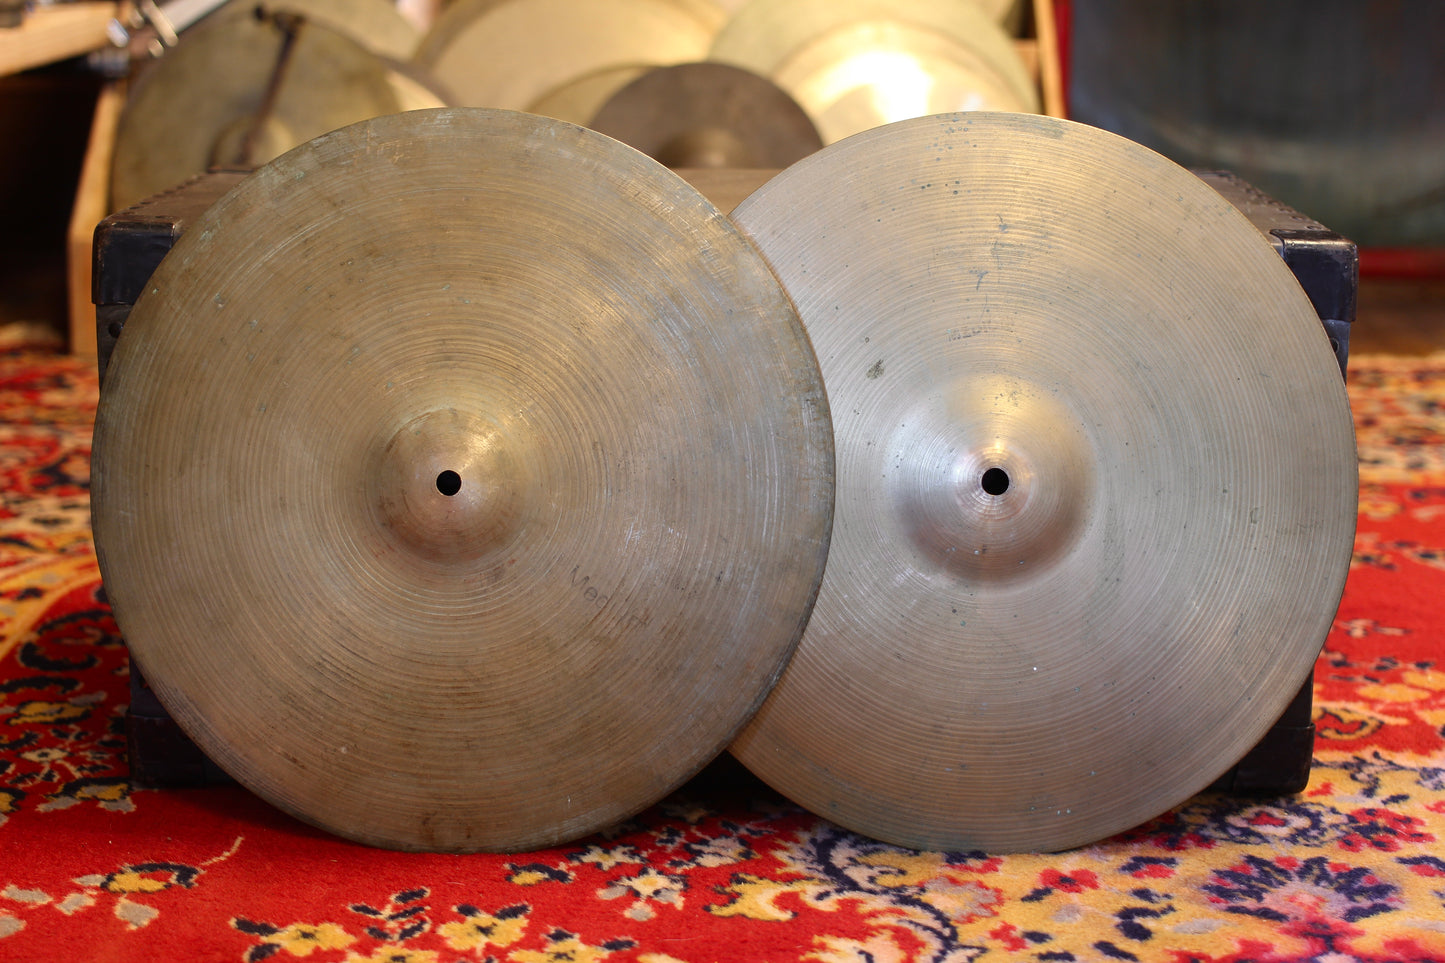 1960s Pre-UFIP "Made-In-Italy" 14" Hi-Hat Cymbals 775/1090g